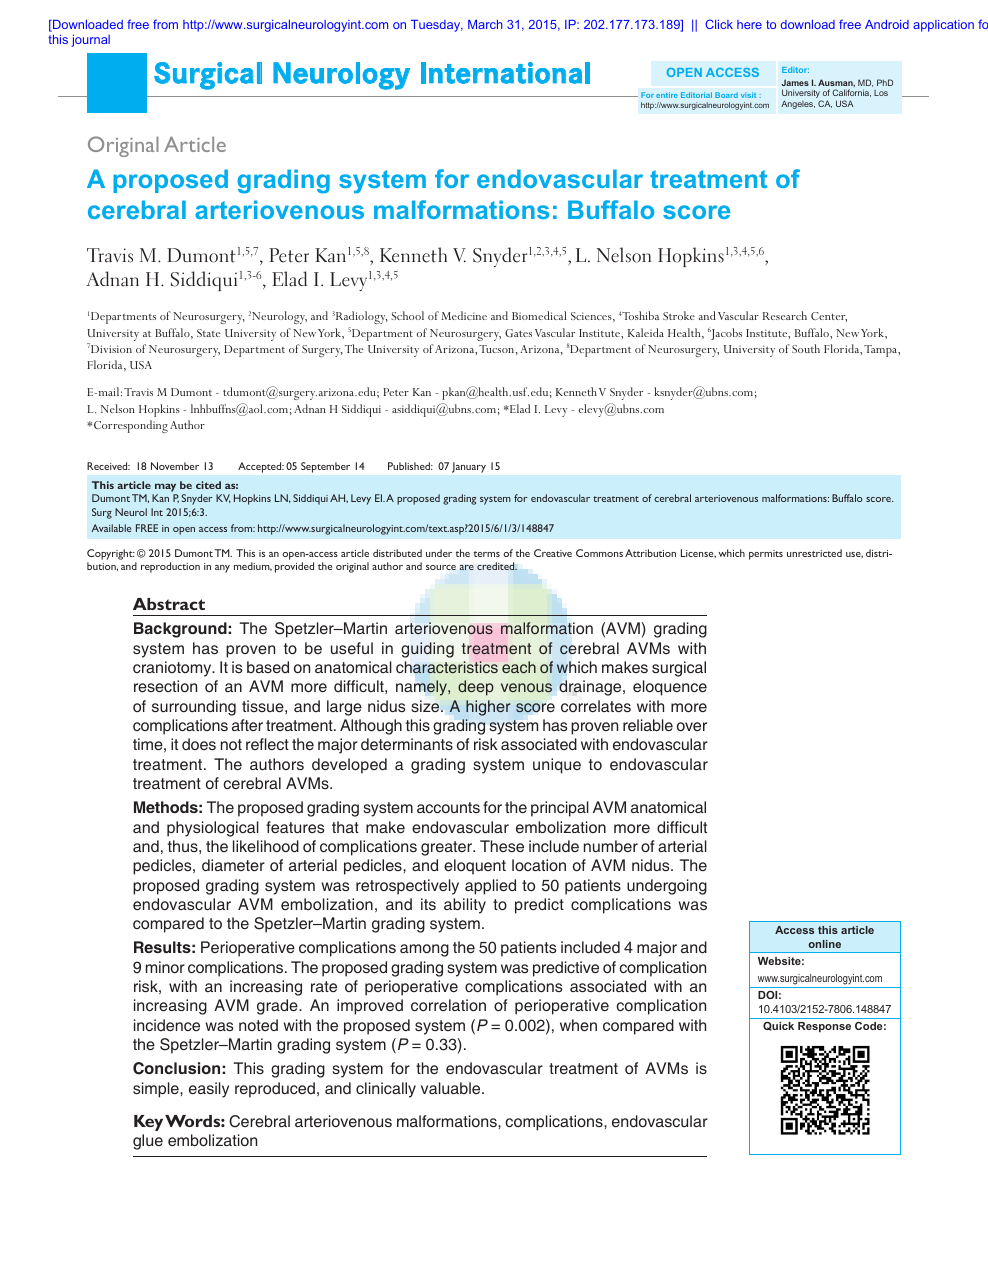 A system for endovascular treatment of cerebral arteriovenous malformations: Buffalo score – topic of research paper in Clinical Download scholarly article PDF and read for free on CyberLeninka open